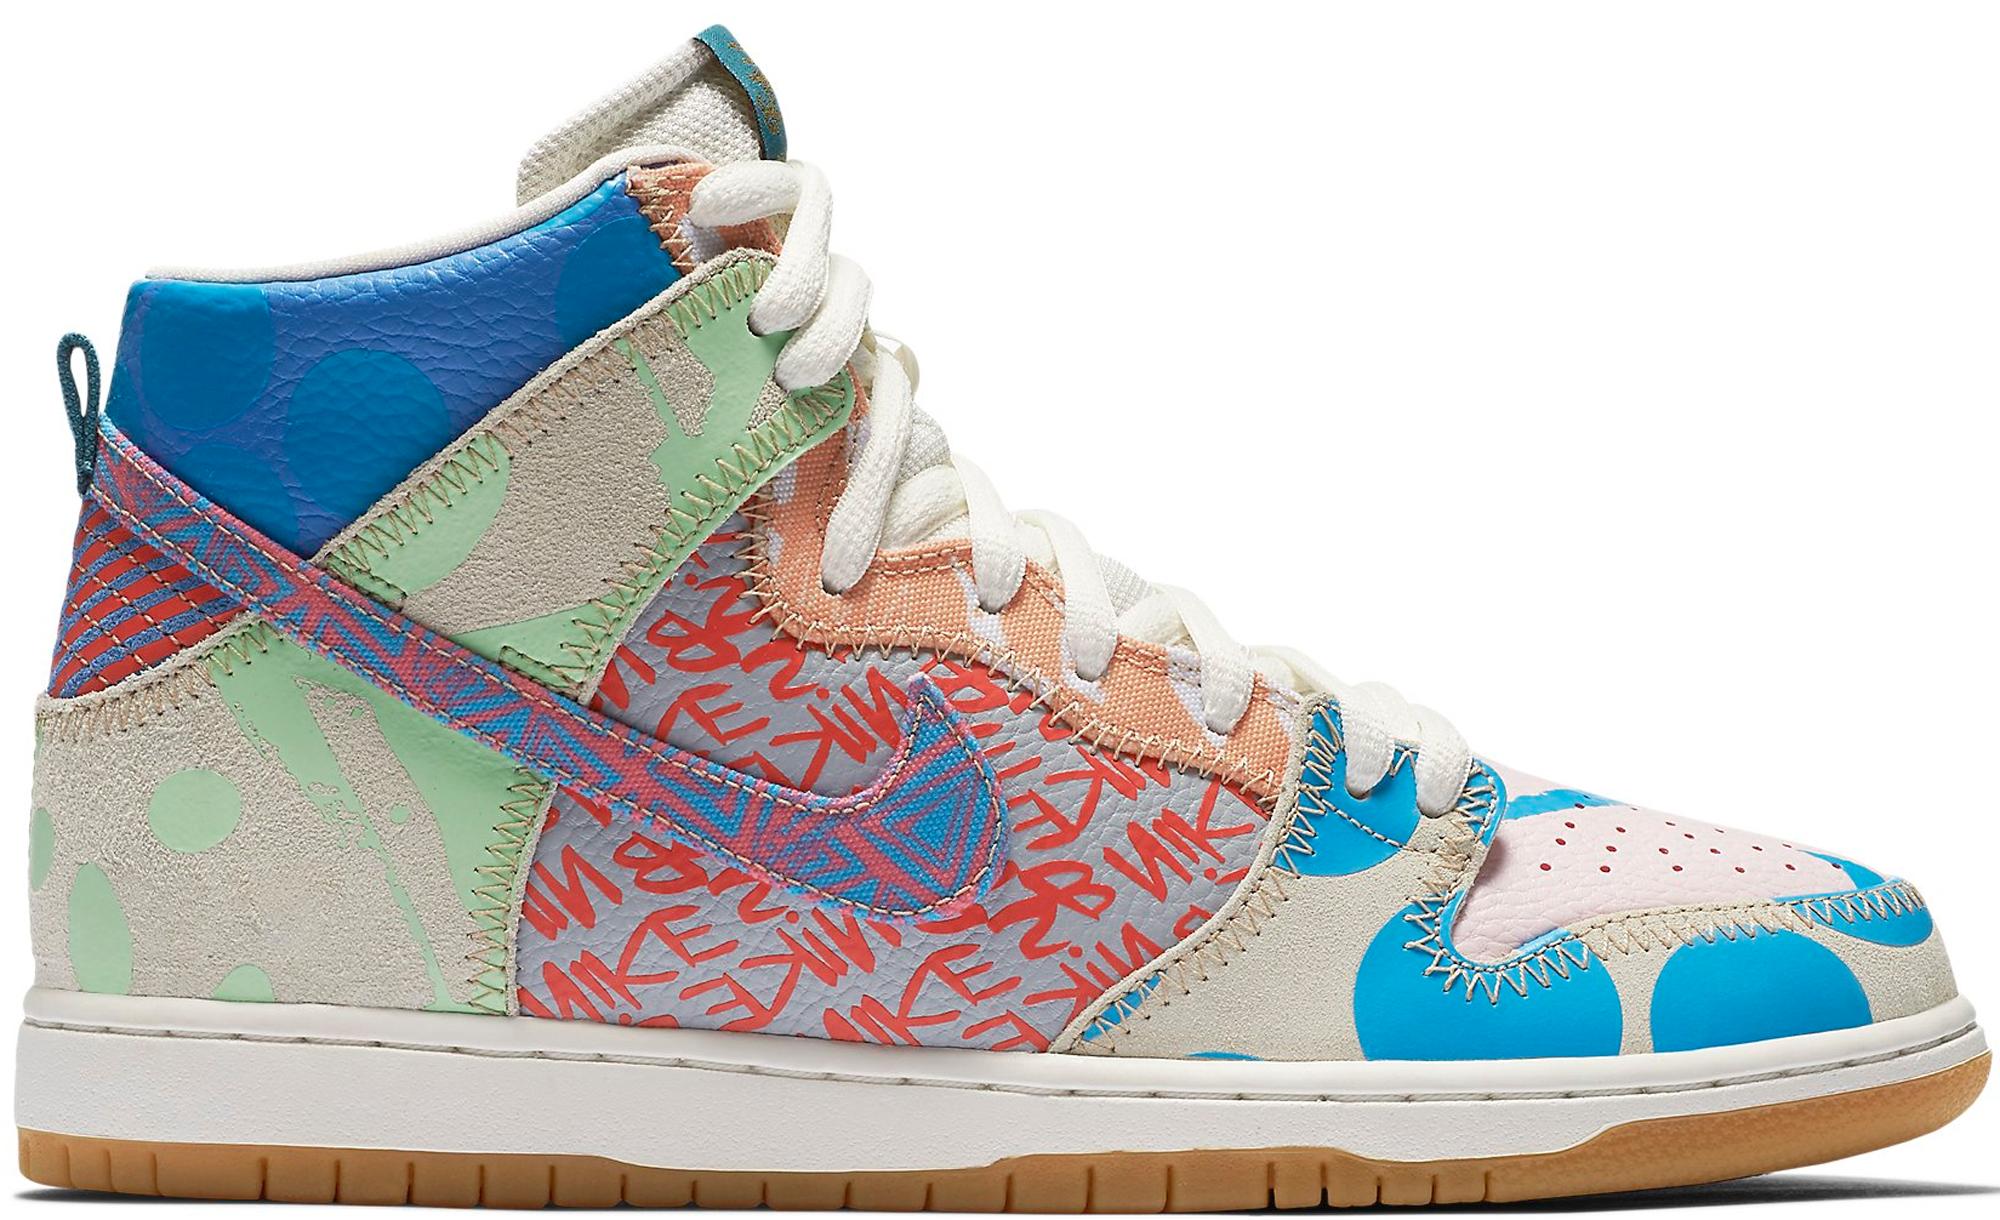 Thomas Campbell x Nike SB Dunk High Pro What The - StockX News